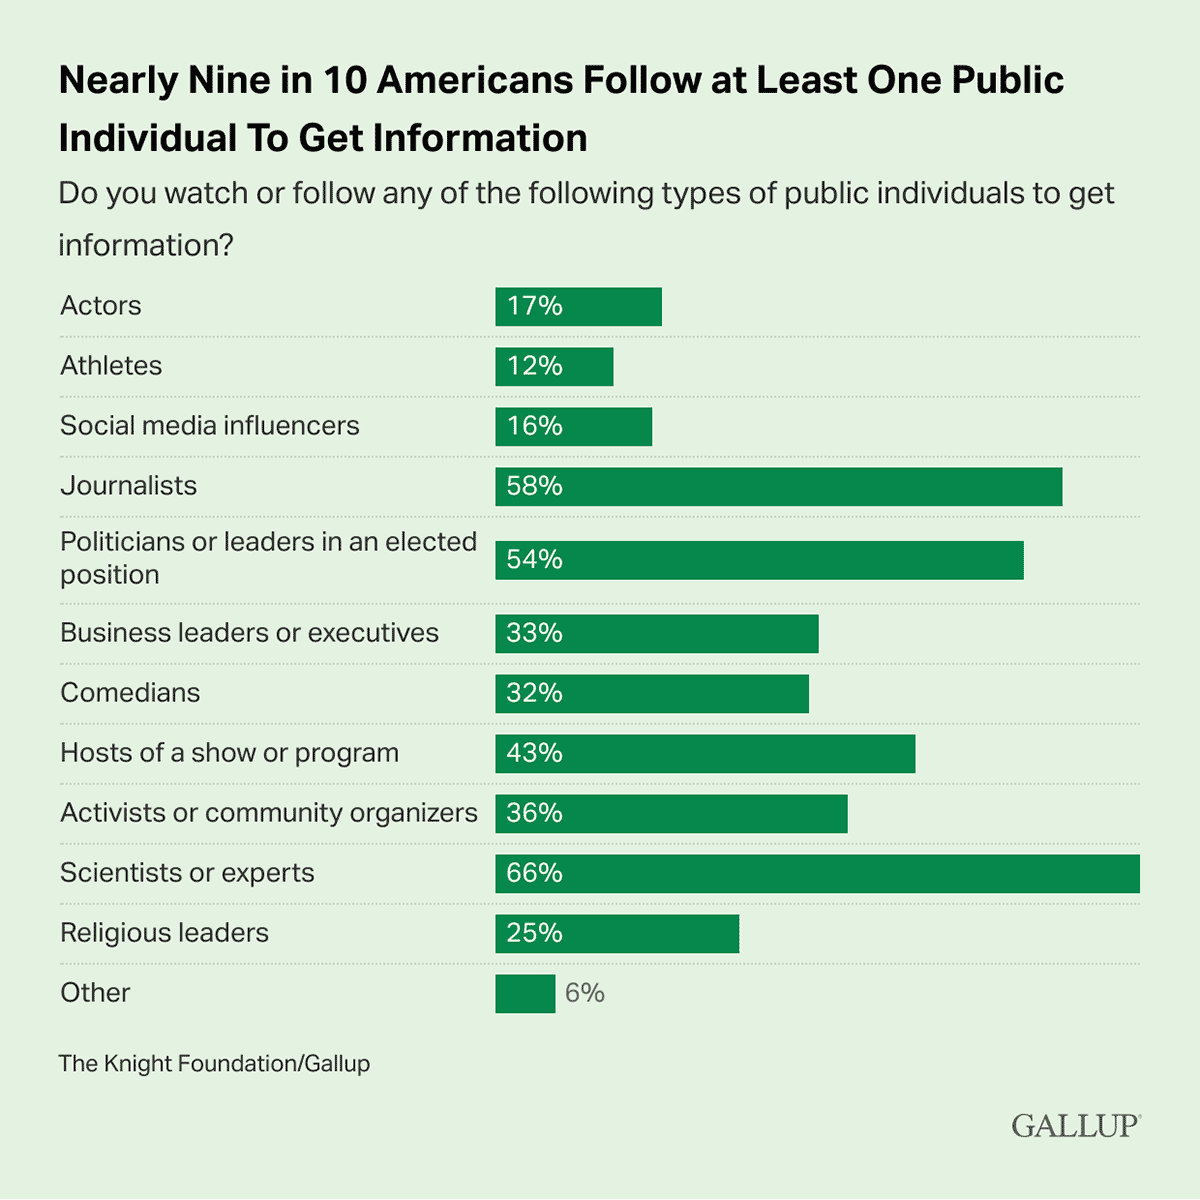 Bar Chart: Types of public individuals that Americans follow for news information.